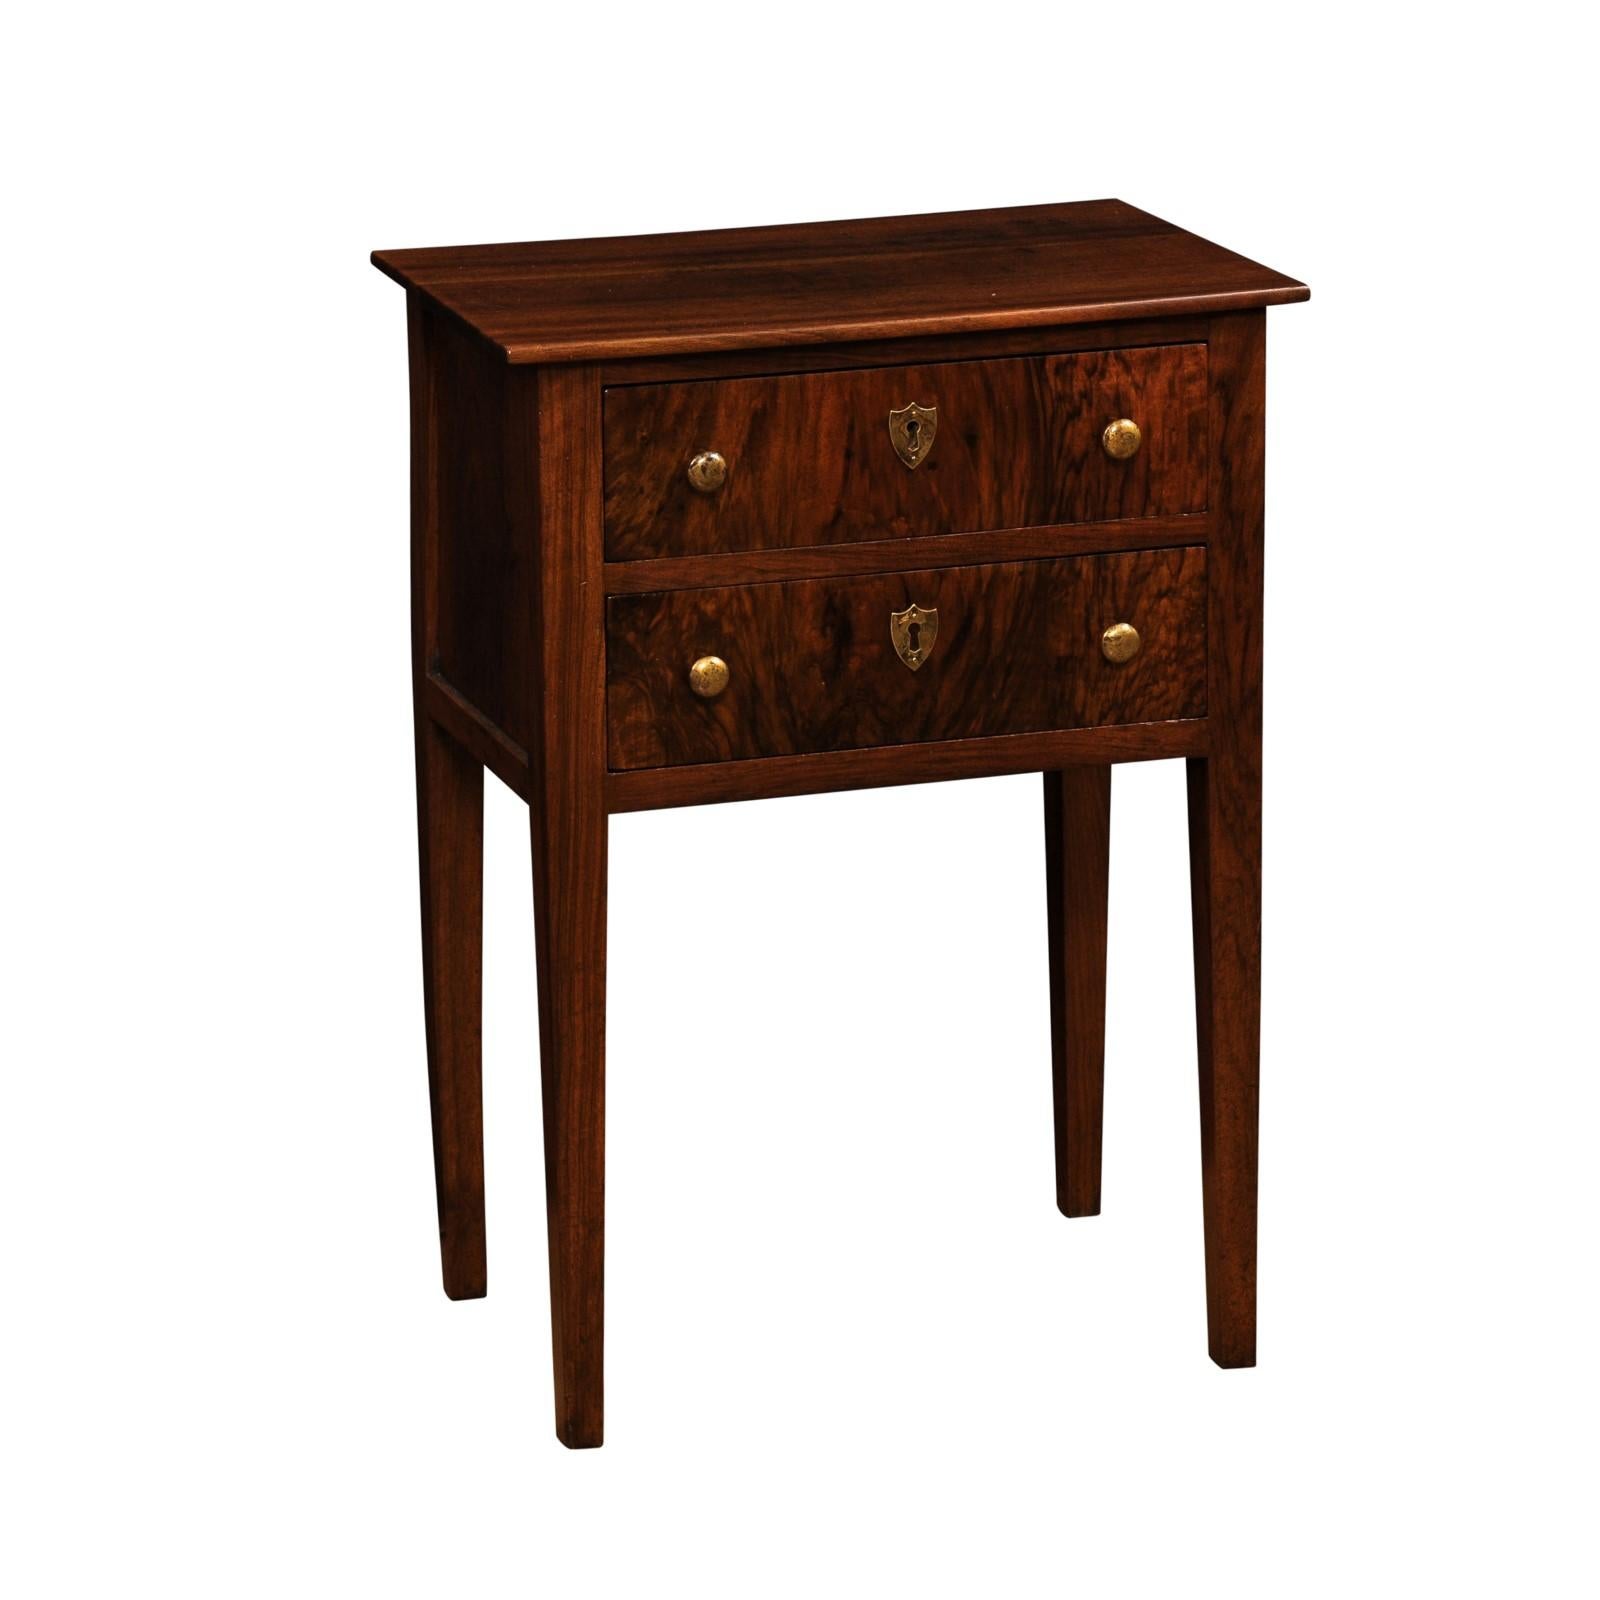 An Italian Directoire period walnut bedside table from the 19th century, with two drawers, butterfly veneer on the façade, brass hardware, shield shaped escutcheons and tapered legs. This Italian Directoire period walnut bedside table, dating back